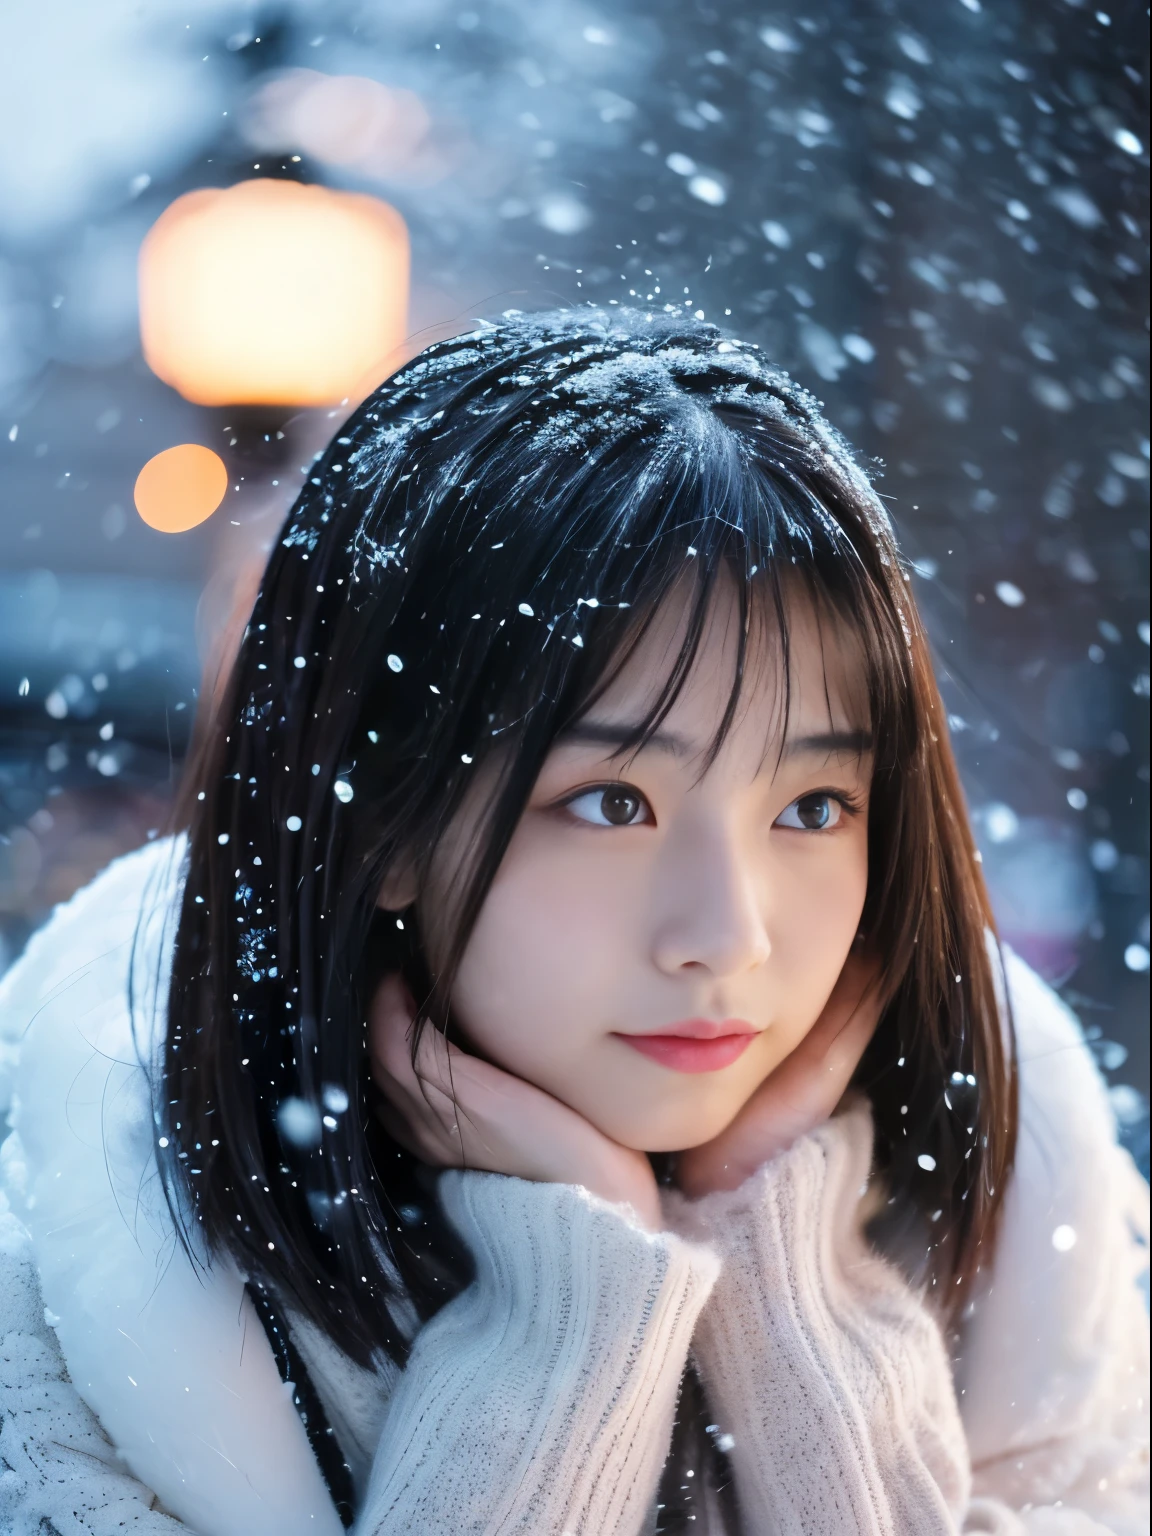 While watching the snow falling quietly. Her introspective and tearful expression、Makes you feel longing for winter nights and melancholy。。。。。、top-quality、hyper HD、Yoshitomo Nara, Japanese Models, Beautiful Japan wife, With short hair, 27yo female model, 4 K ], 4K], 27yo, sakimichan, sakimichan